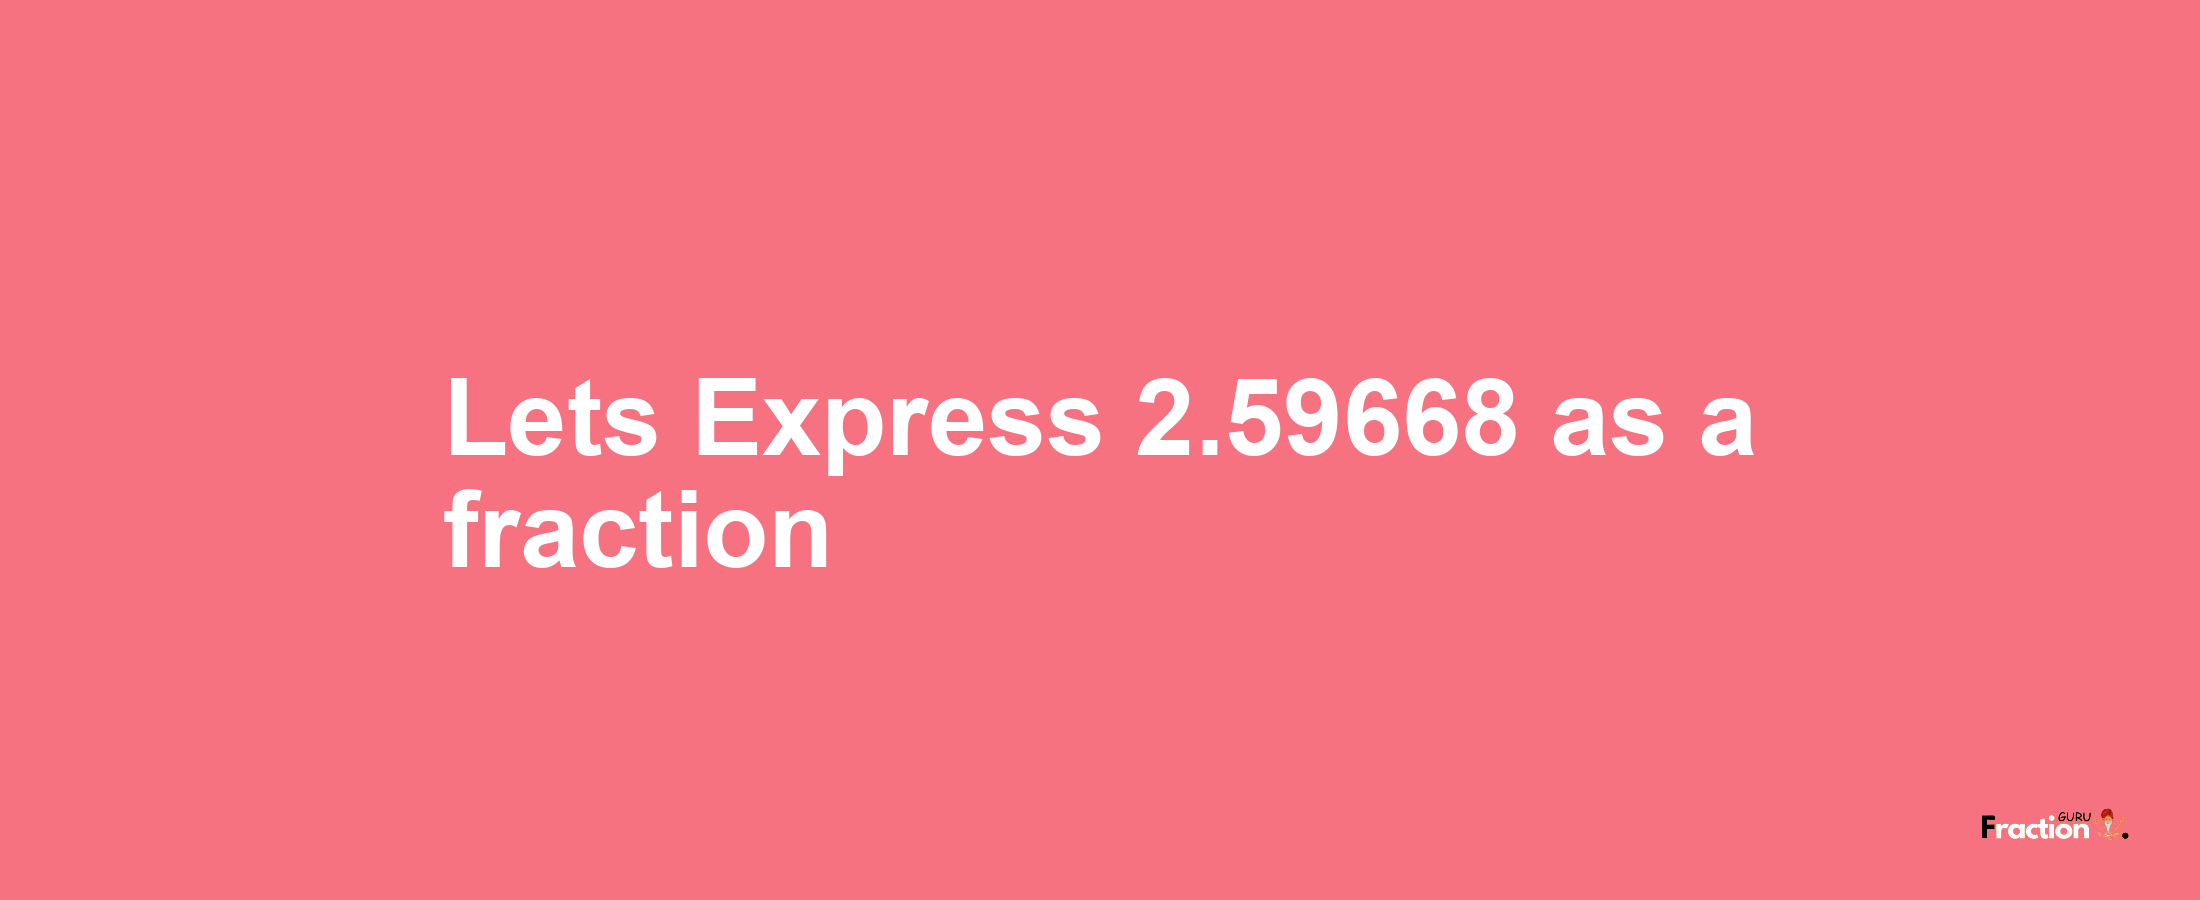 Lets Express 2.59668 as afraction